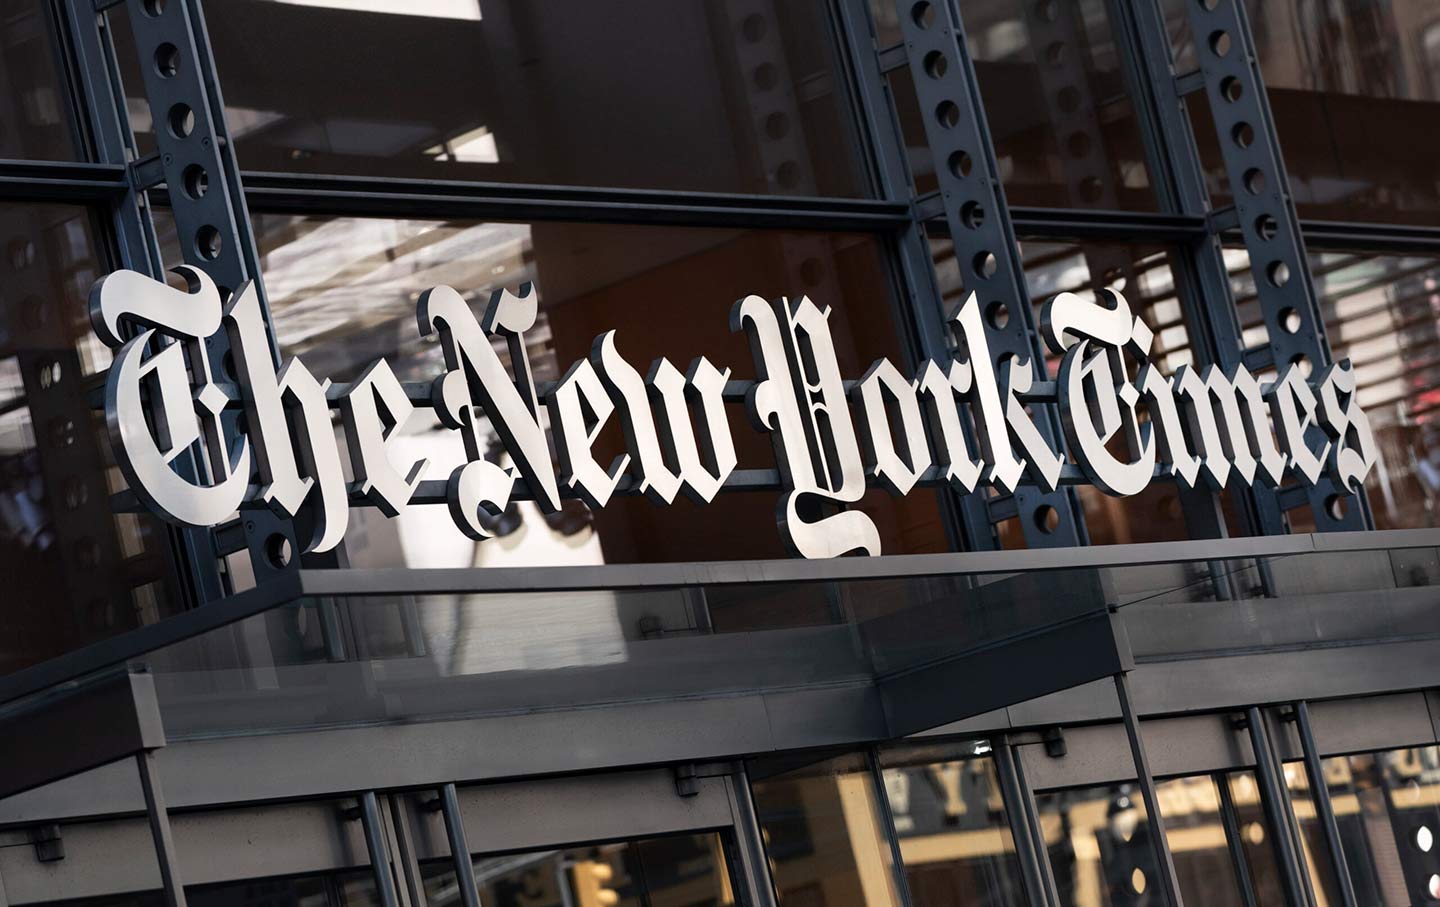 The logo of “The New York Times” hangs above the entrance to its building.